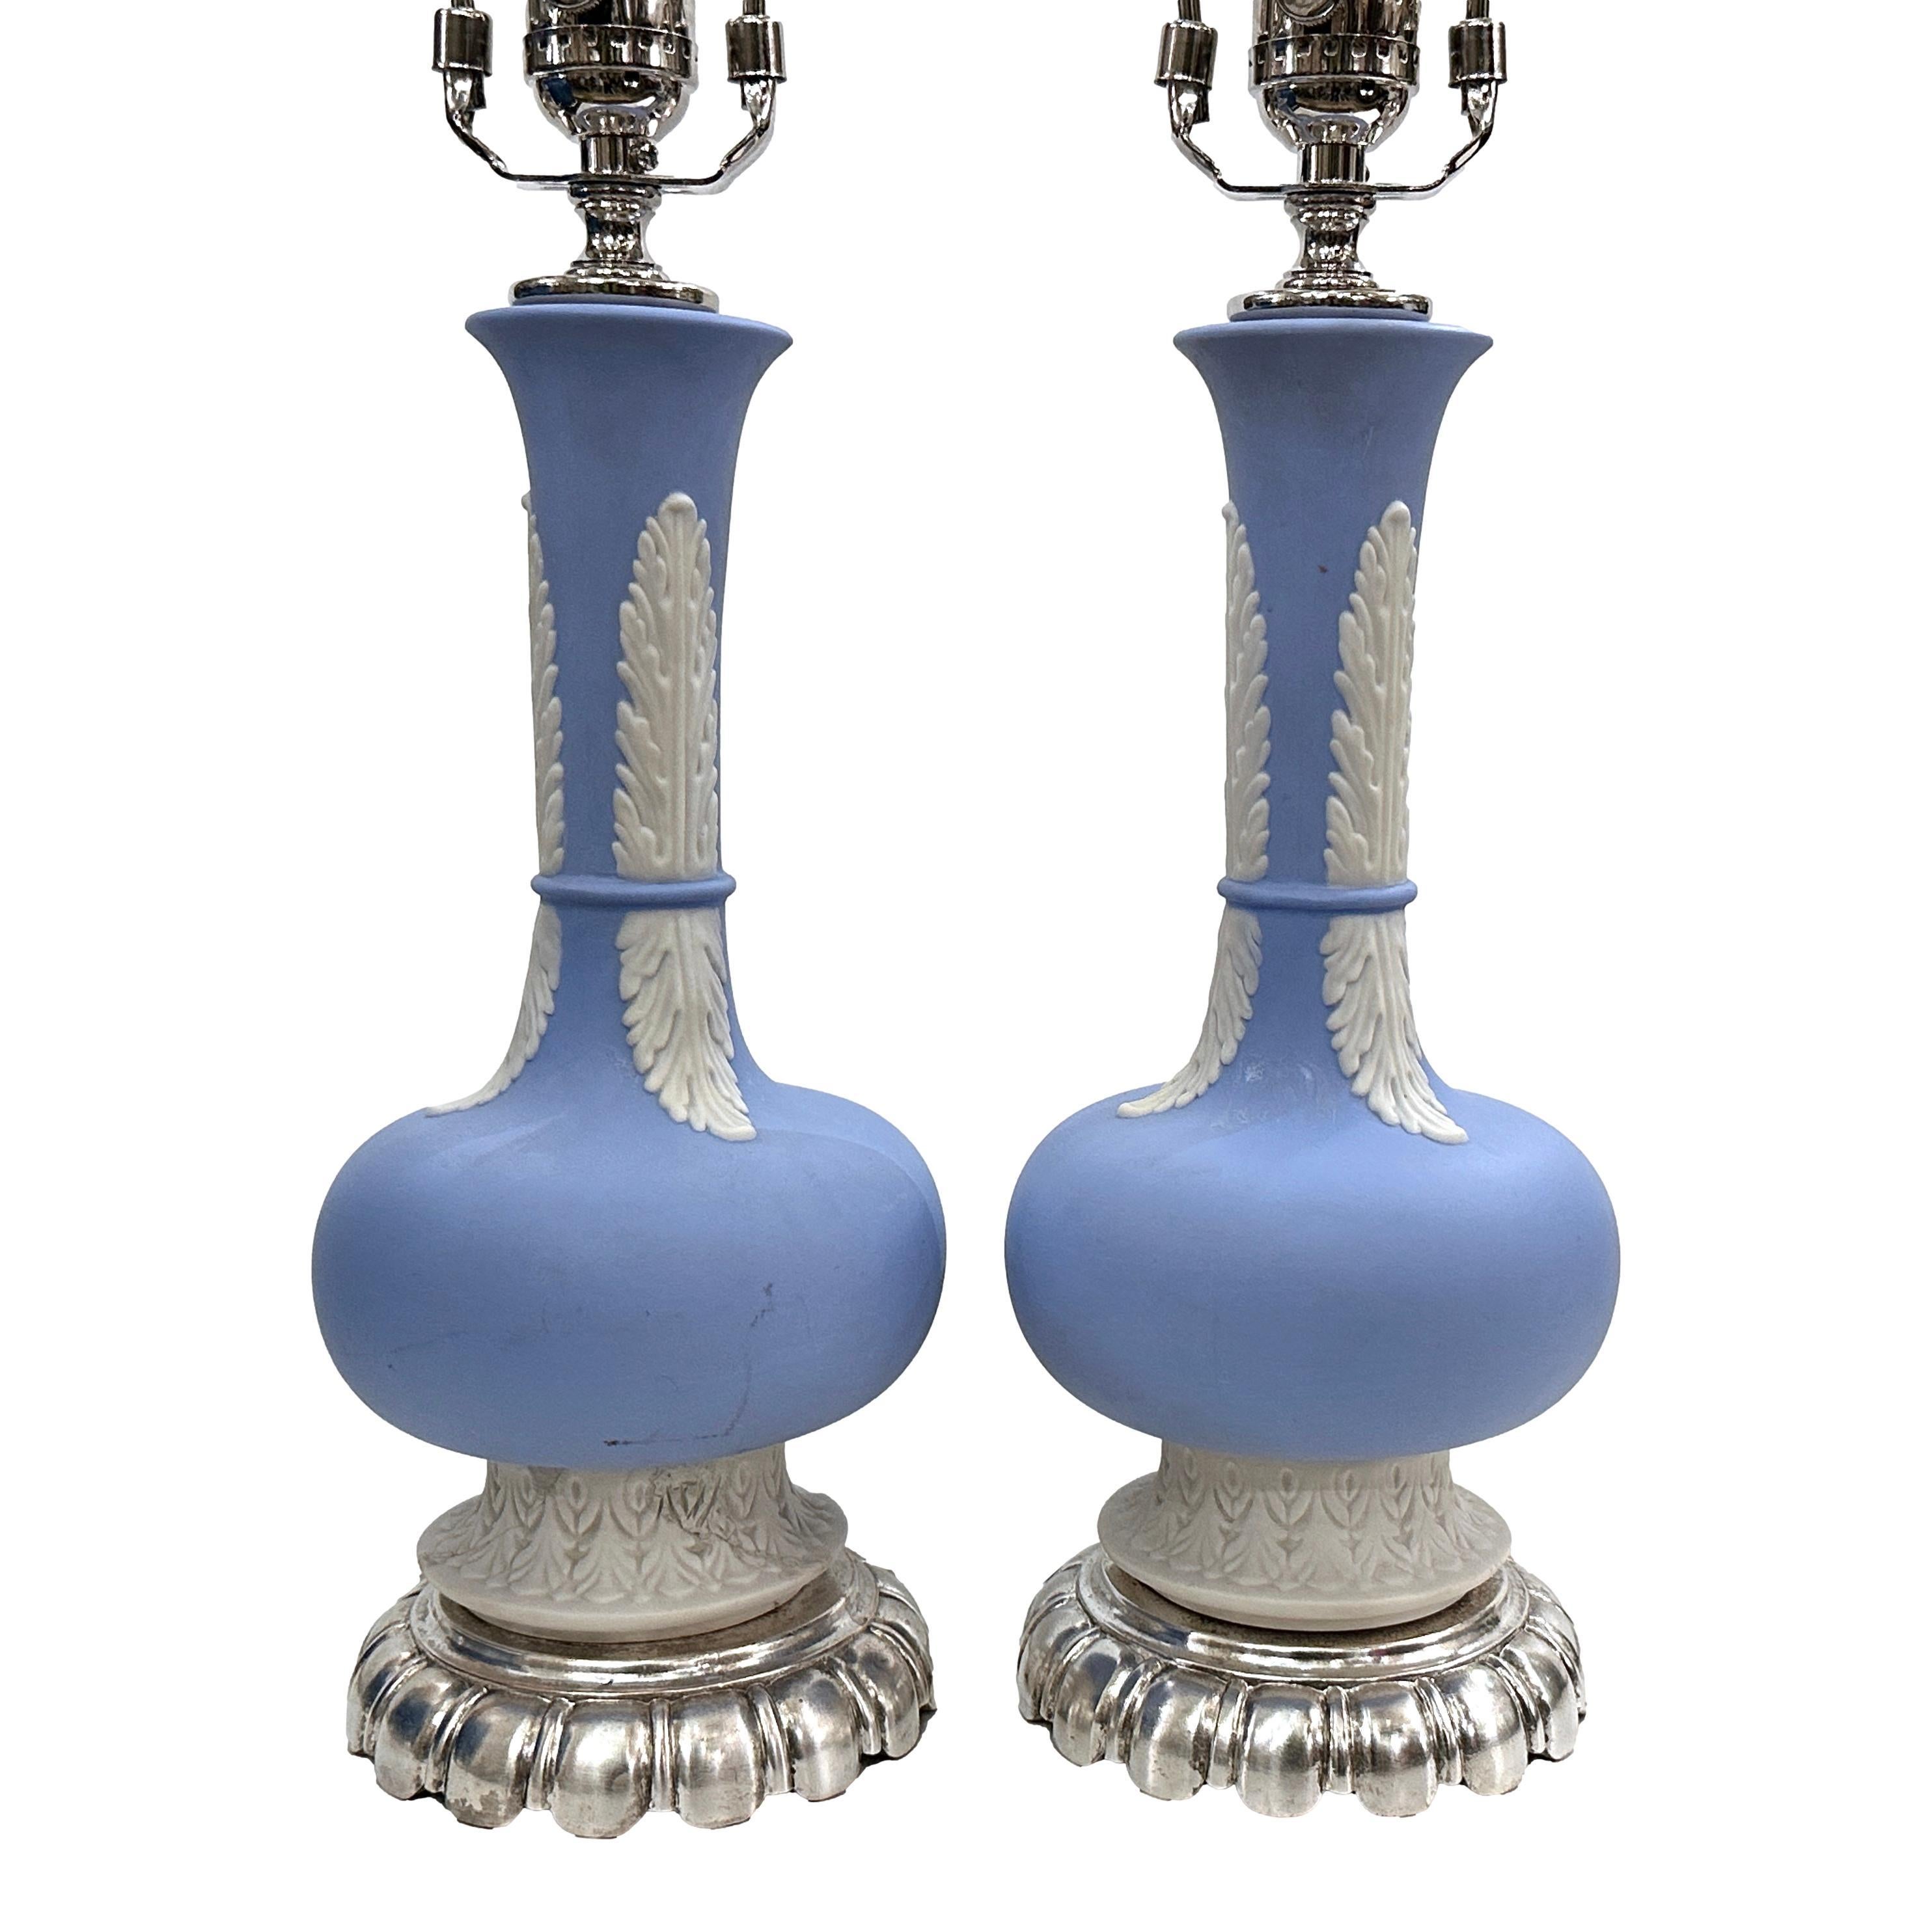 A pair of circa 1920's English Wedgwood lamps with silvered bases.

Measurements:
Height of body: 13